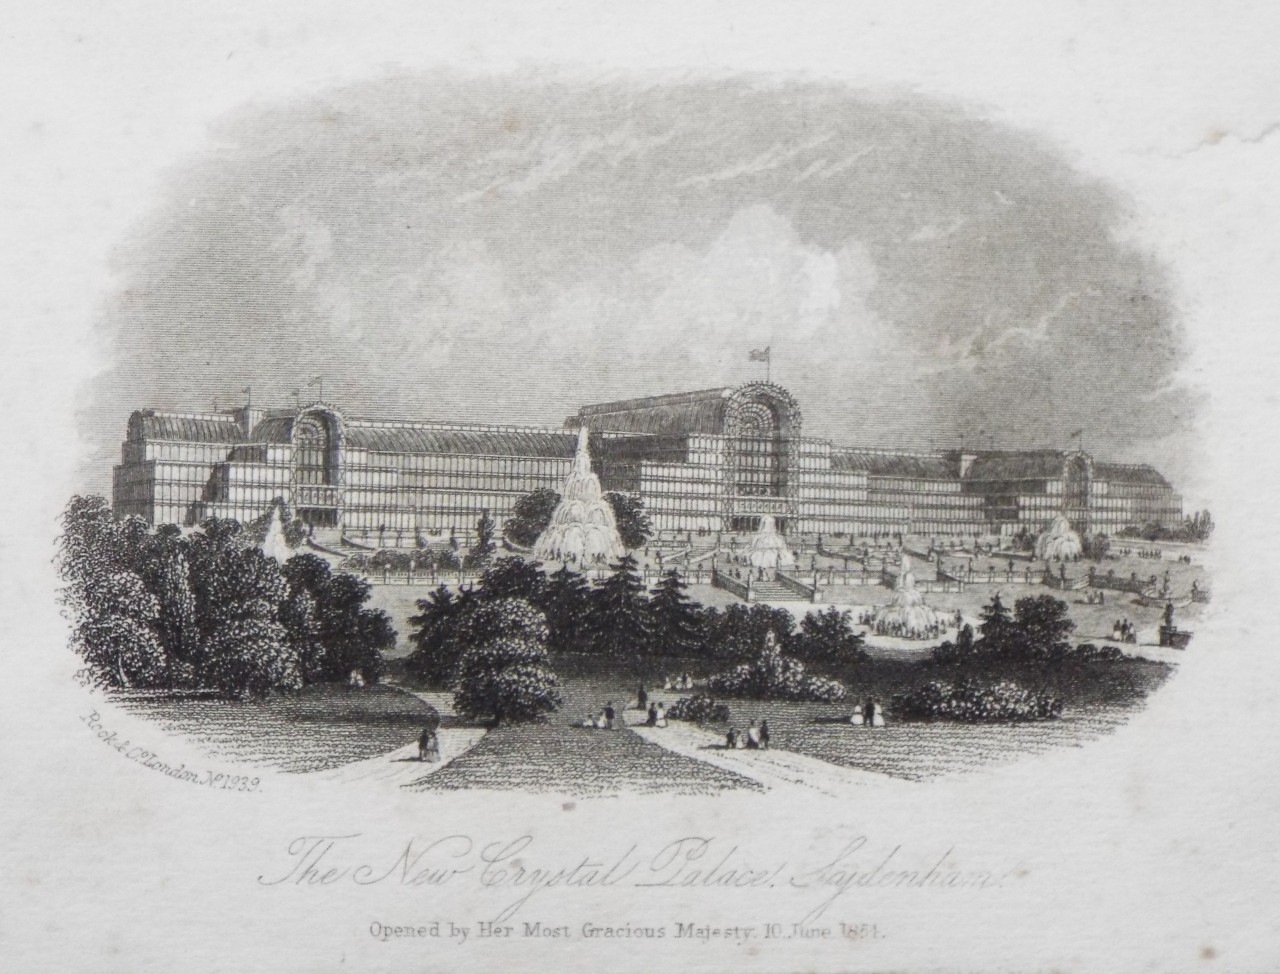 Steel Vignette - The New Crystal Palace, Sydenham. Opened by Her Most Gracious Majesty, 10. June, 1854. - Rock